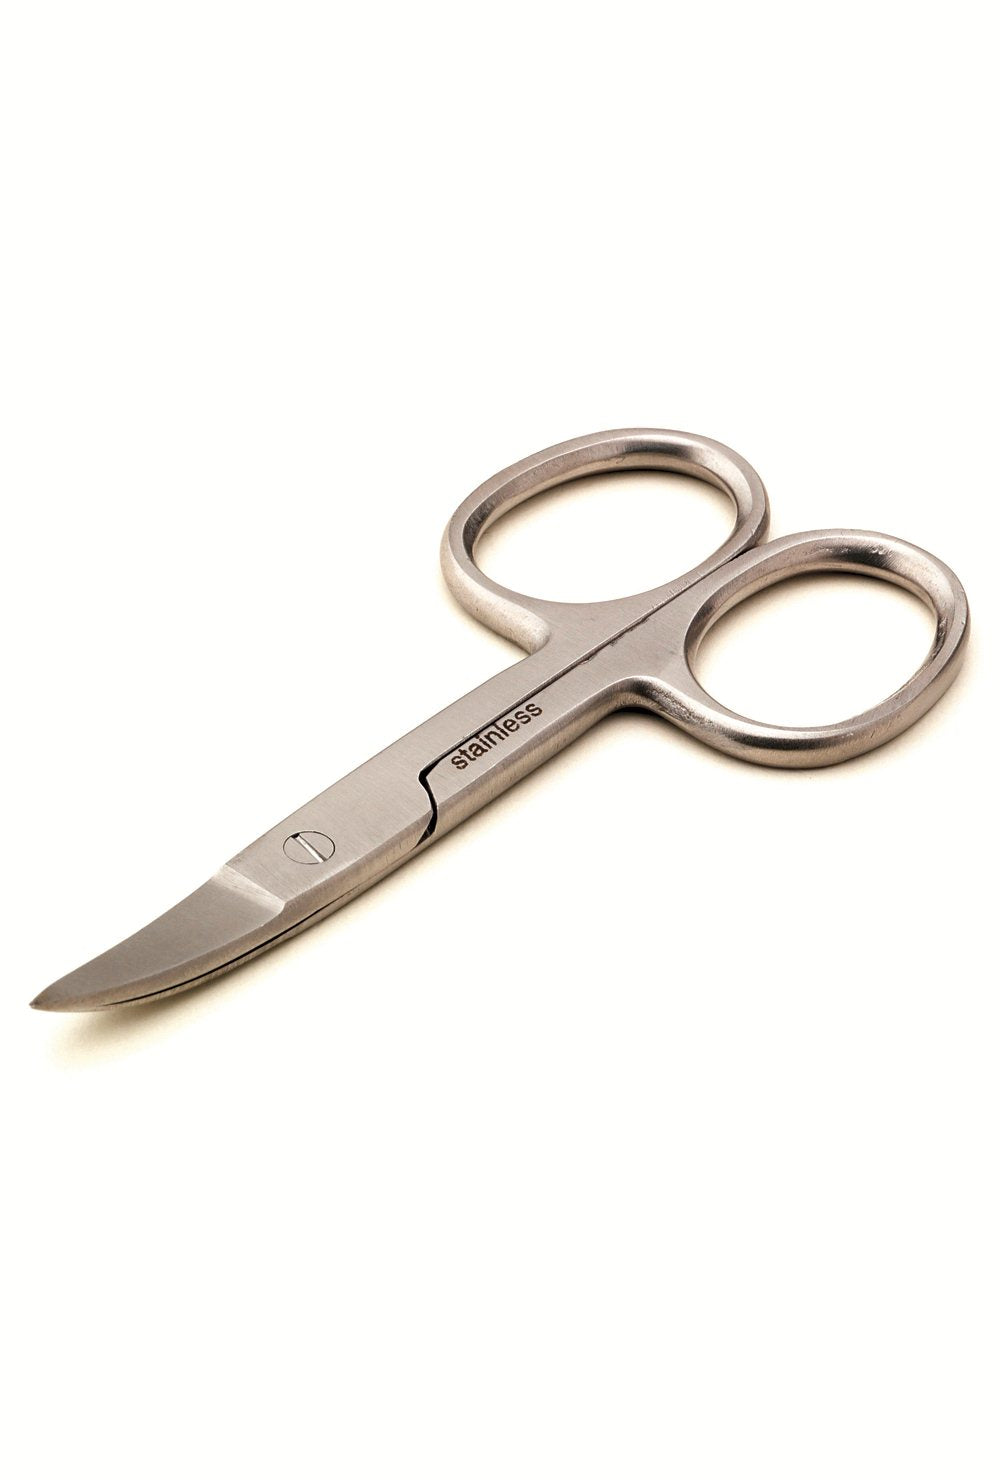 Strictly Professional - Nail Scissor